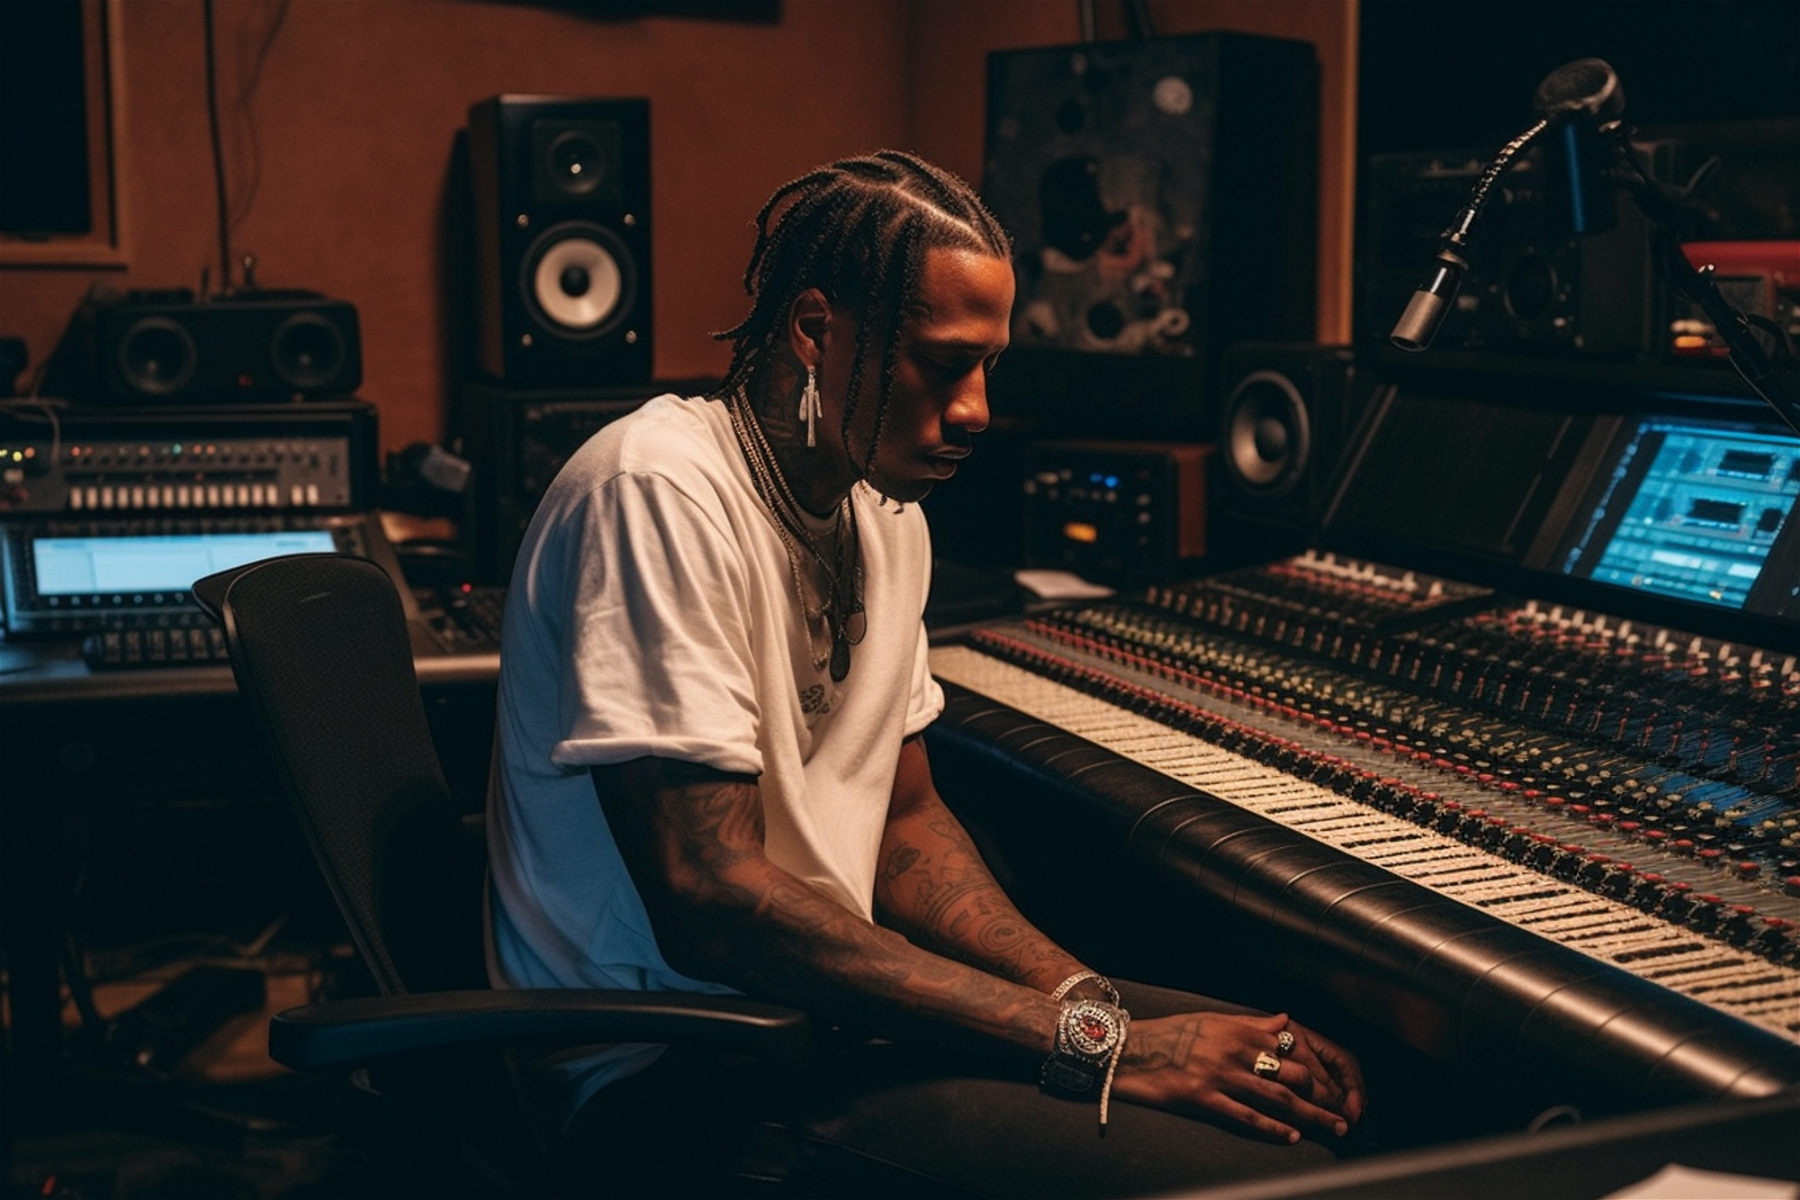 How to Make Travis Scott AI Songs - The Full Guide!